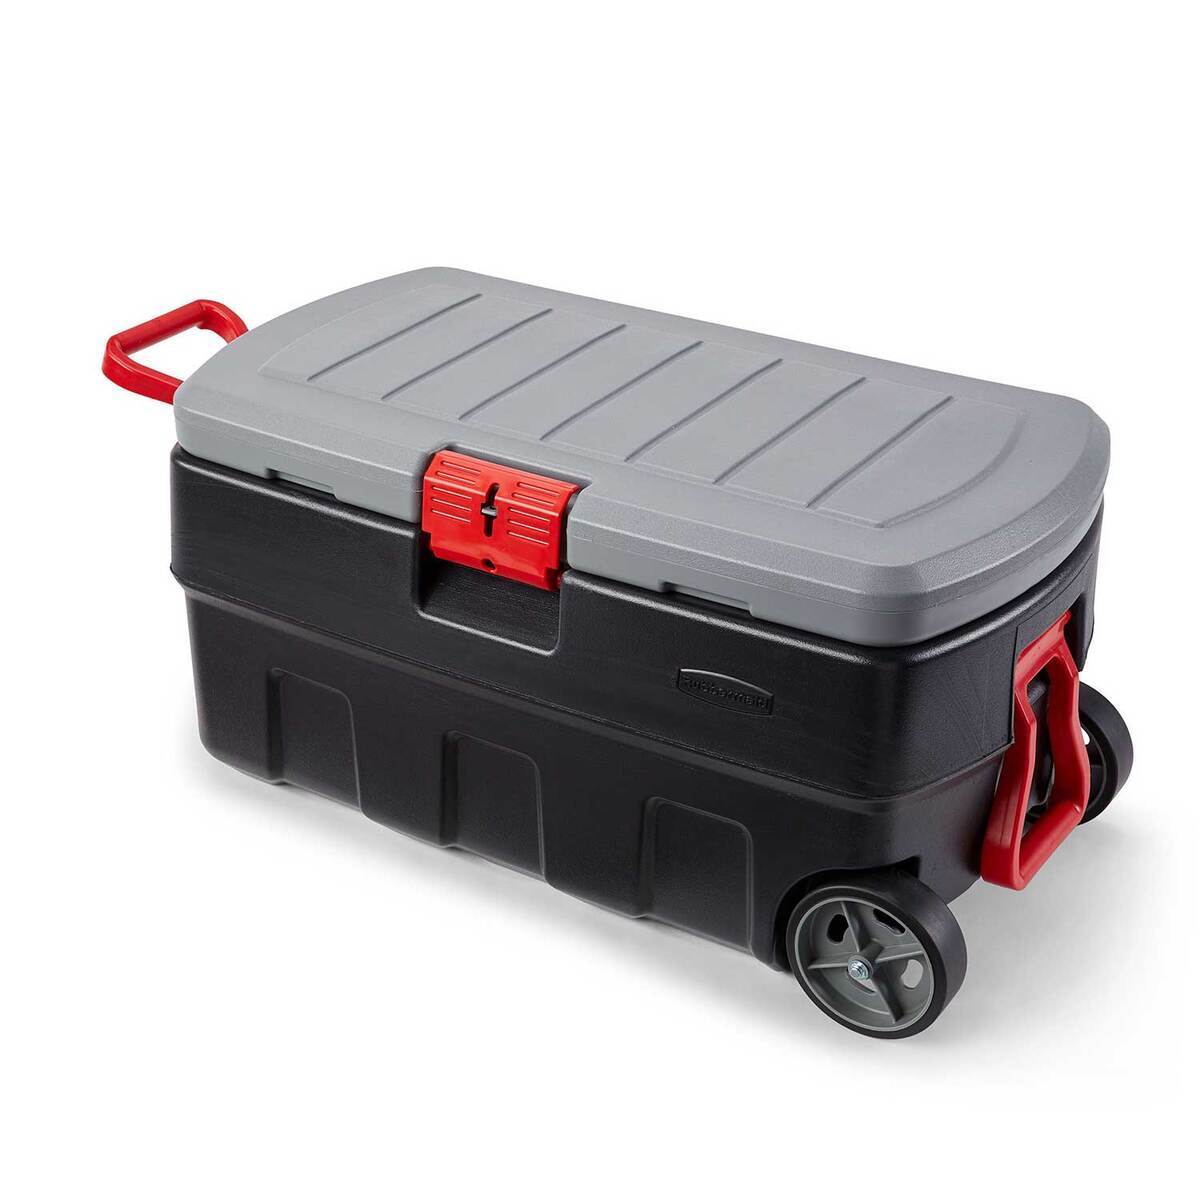 Rubbermaid action packer in Branson, MO, Item AR9142 sold